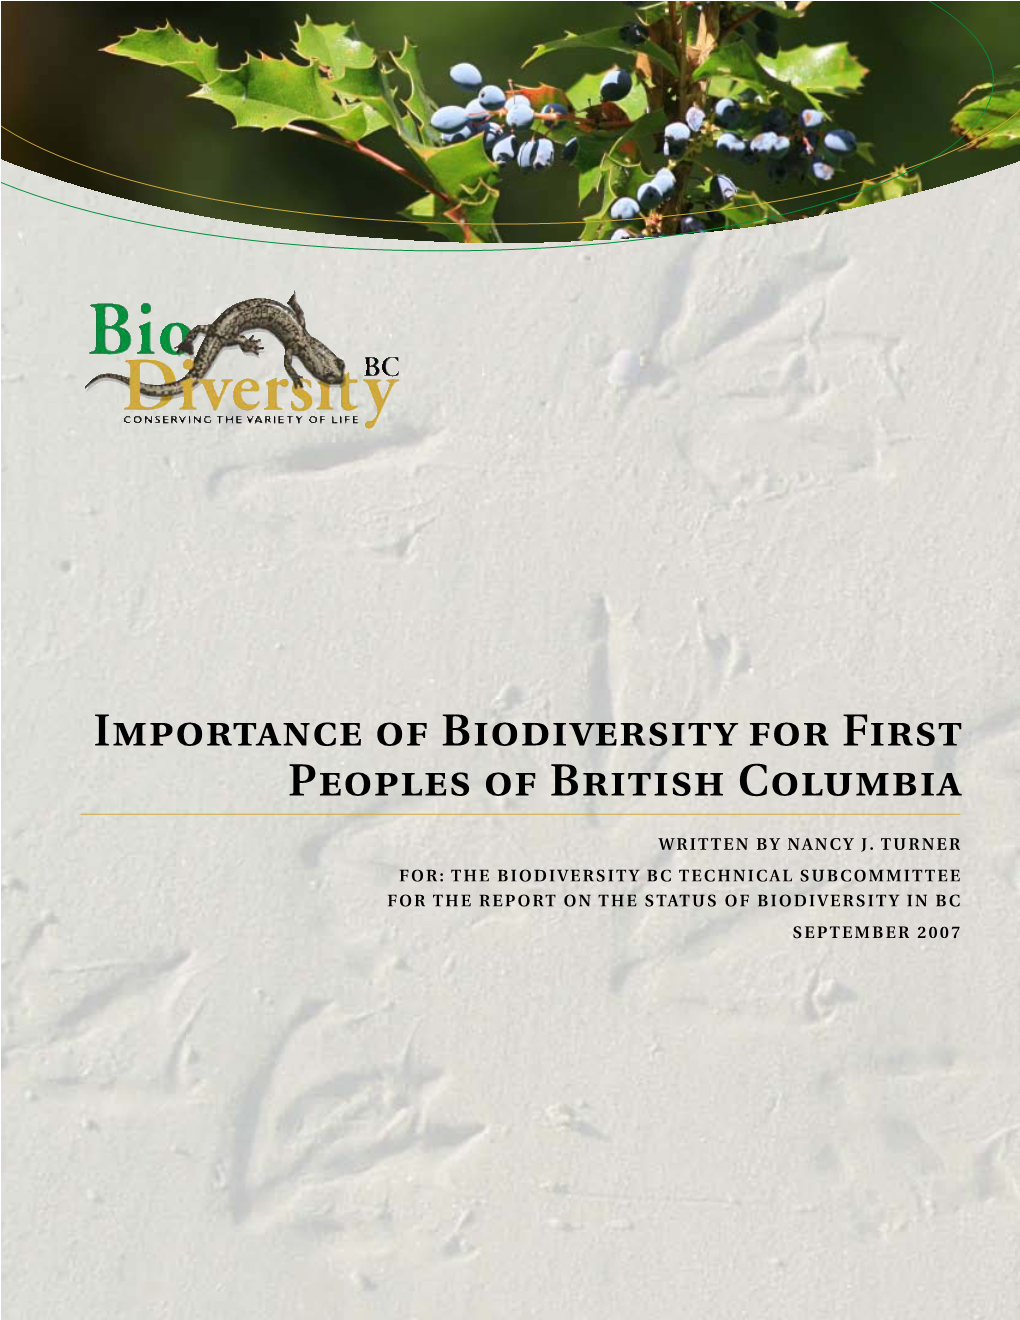 Importance of Biodiversity for First Peoples of British Columbia